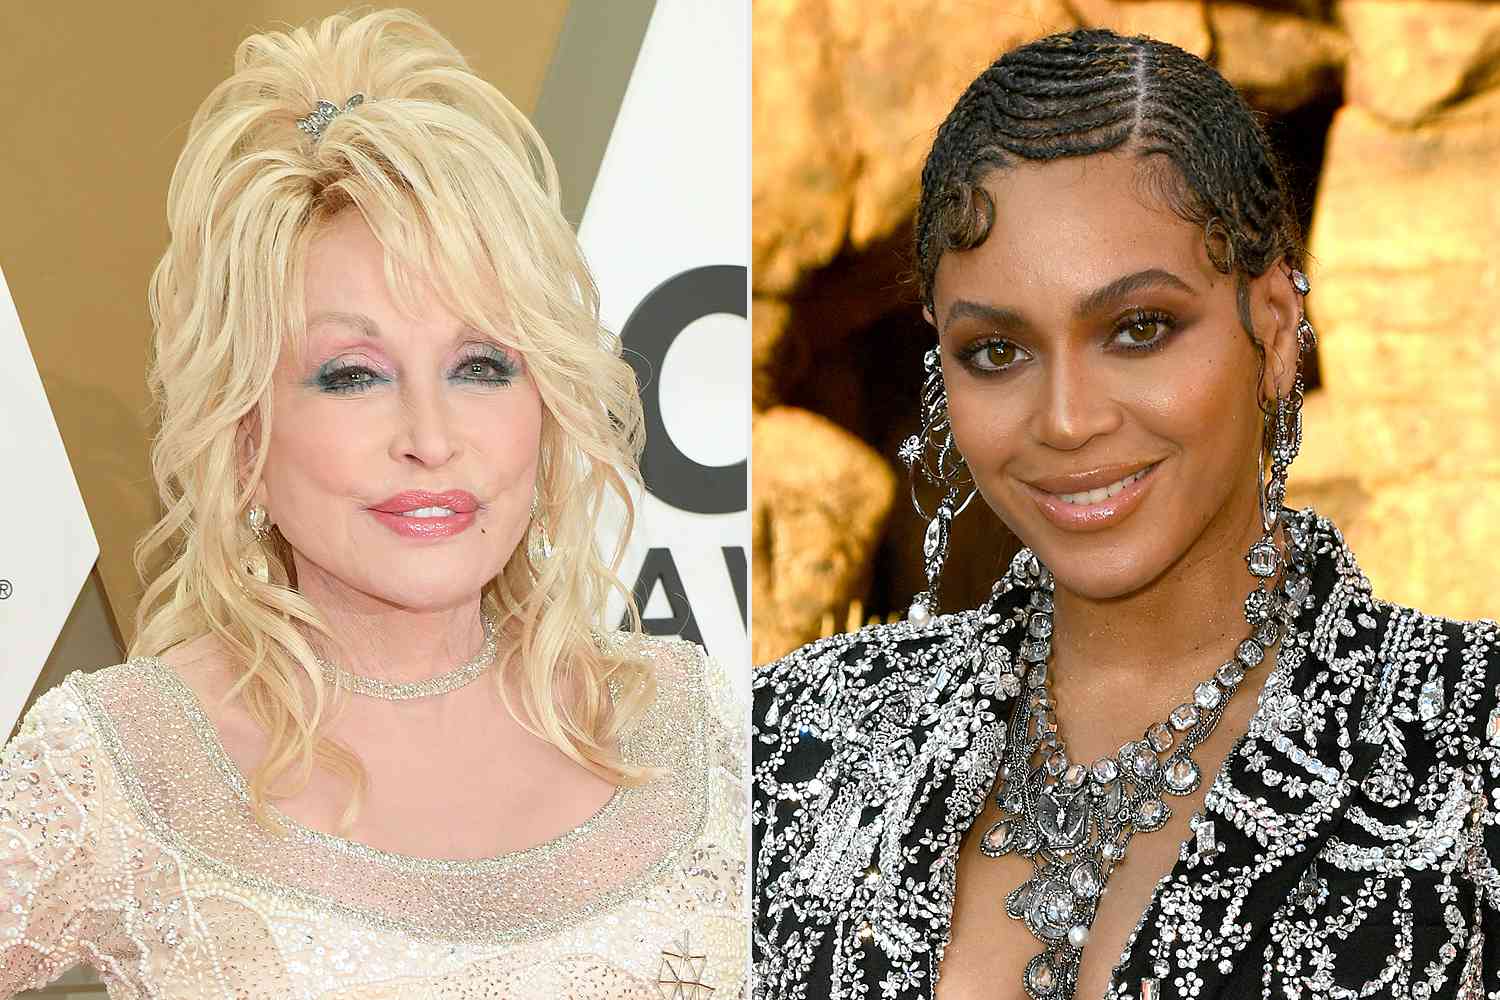 Dolly Parton Welcomes Beyoncé To Country Music With Open Arms